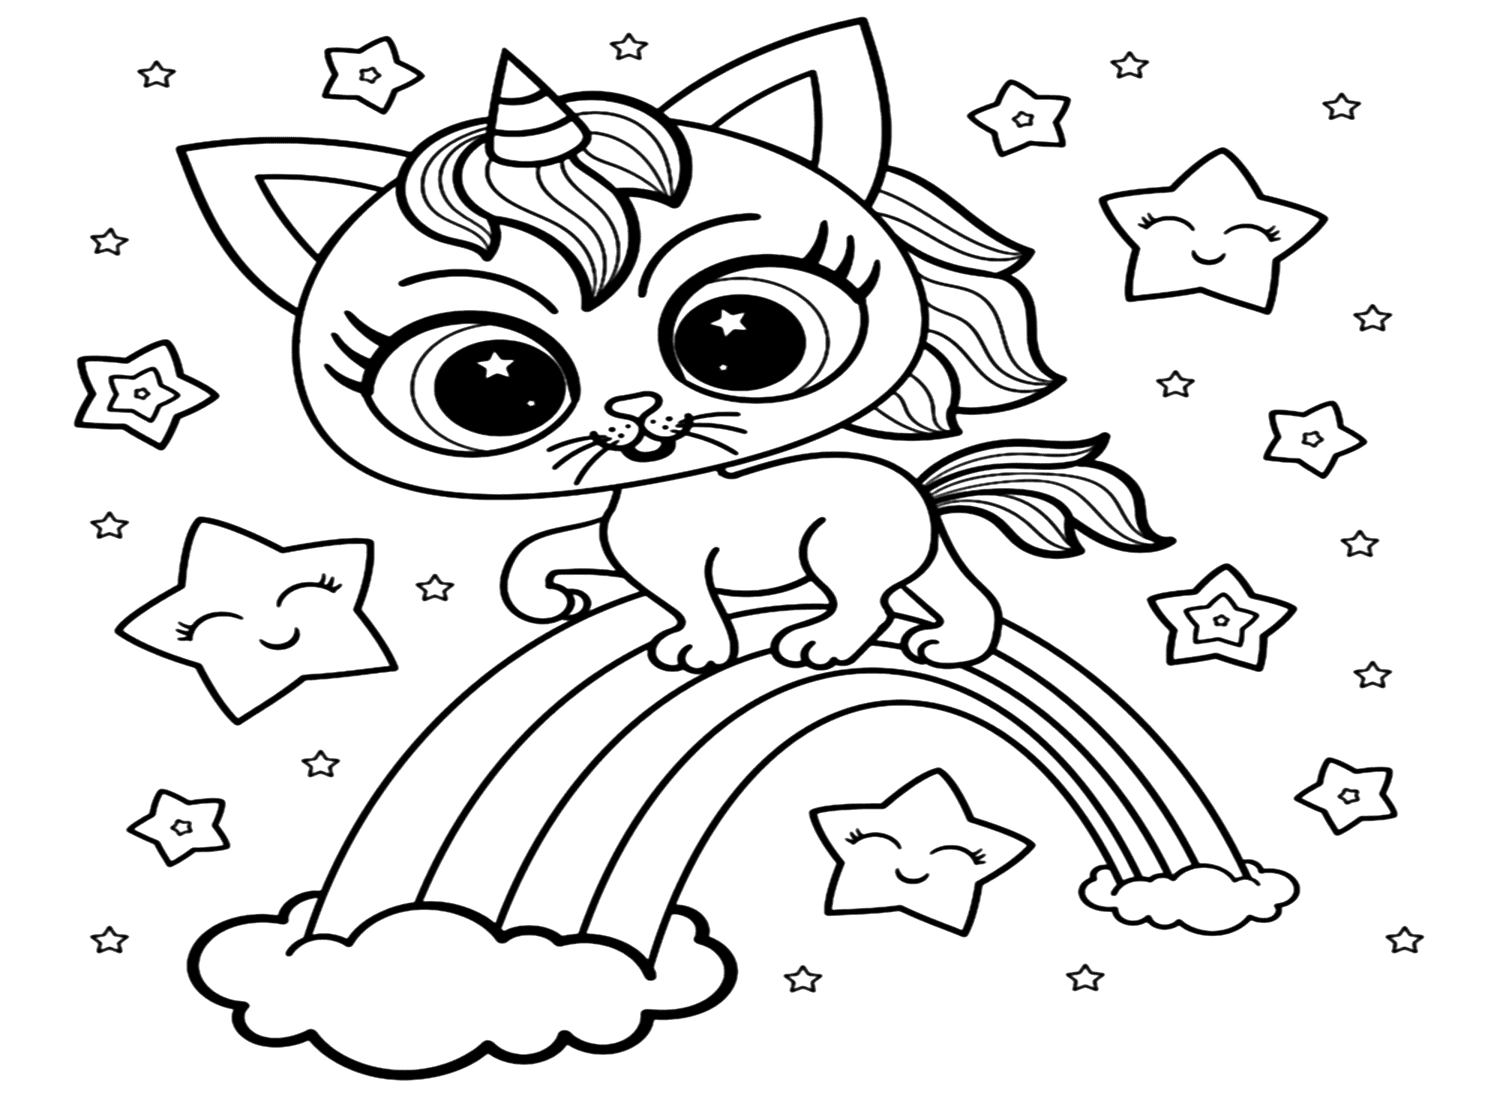 Coloring Pages Unicorn Cat from Unicorn Cat